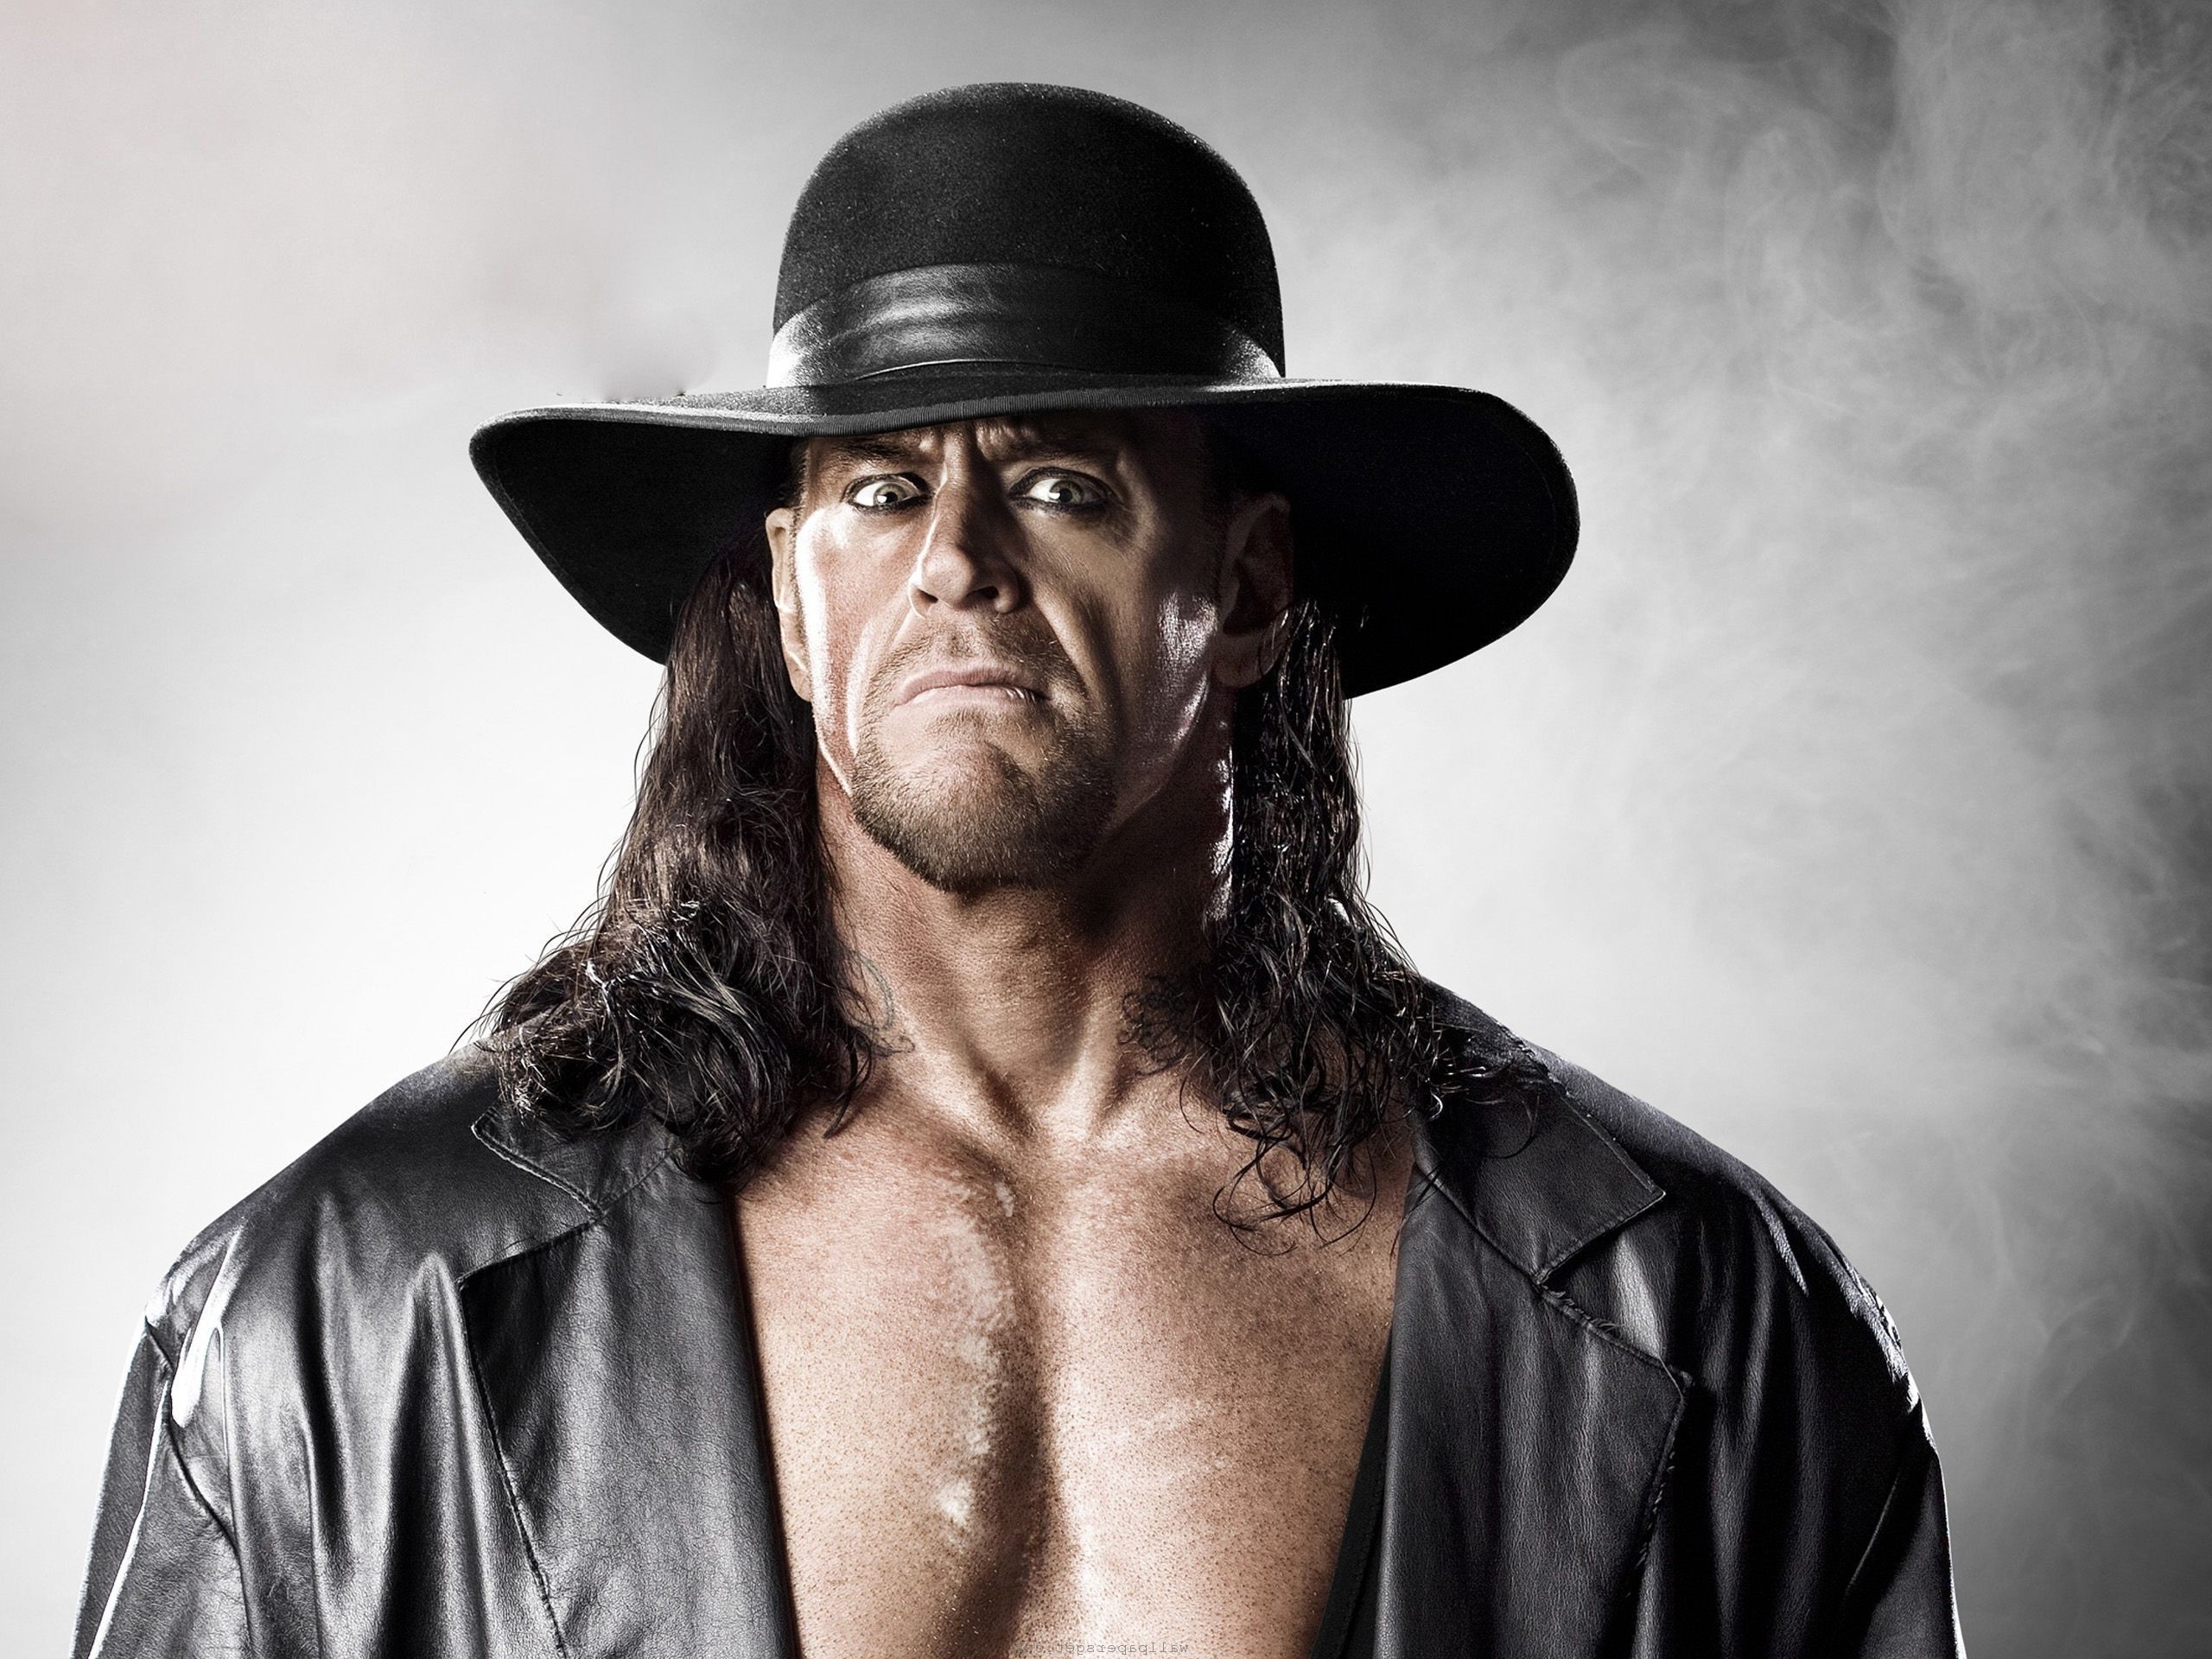 2560x1920 Check out Undertaker WWE Champion HD Photos And Undertaker HD Wallpapers in  widescreen resolution See WWE Superstar High Definition hd Images And The  ...